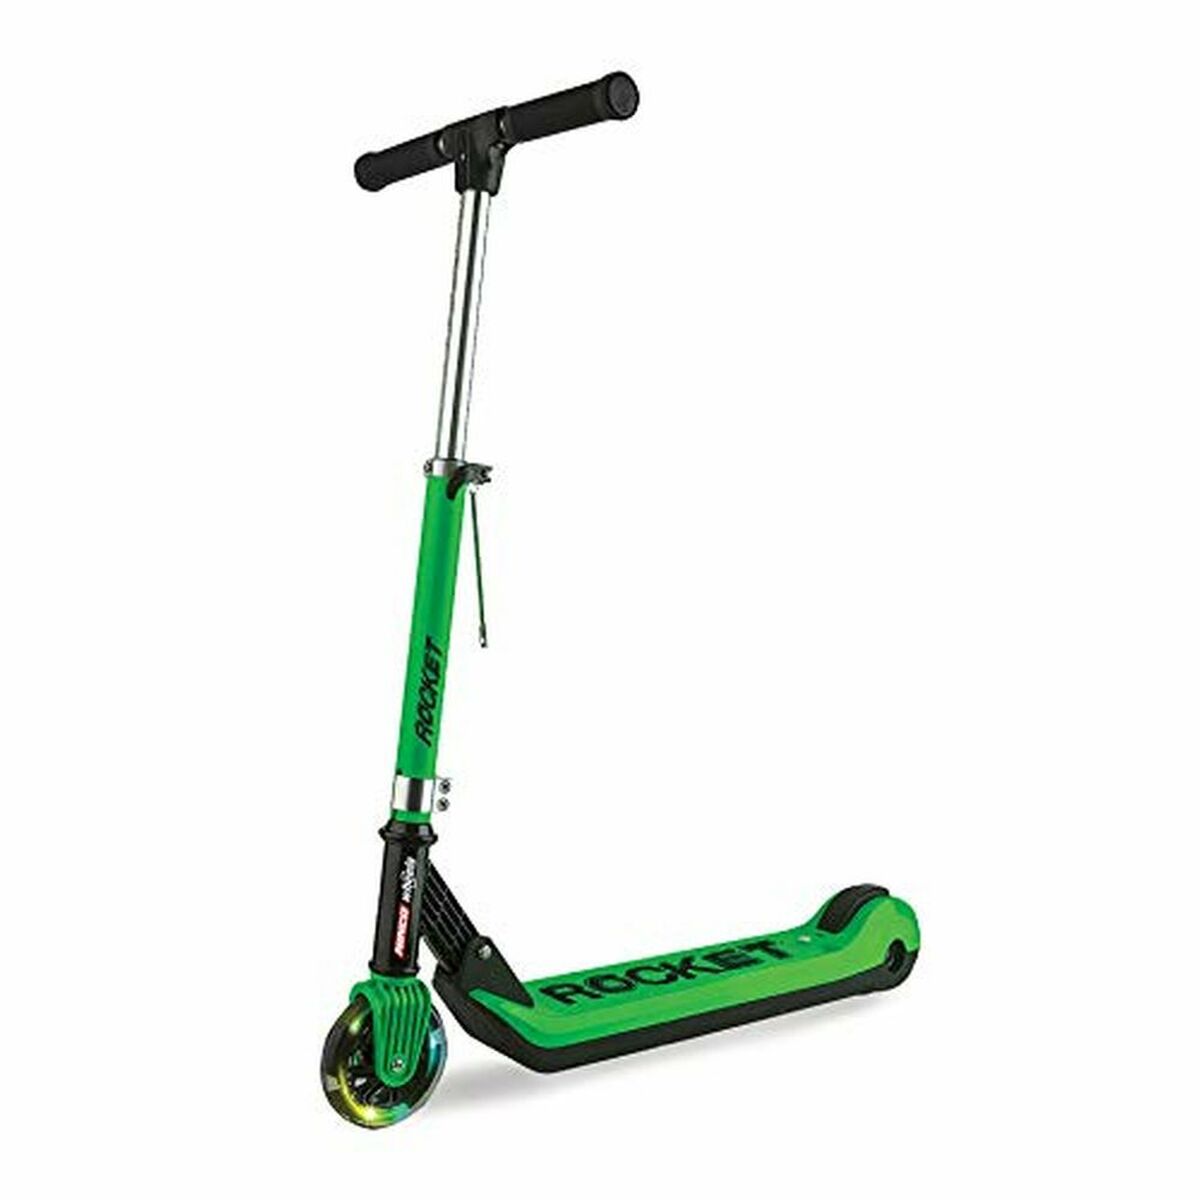 Electric Scooter Ninco Ninco_NH33006 Foldable (4,5 kg), Ninco, Sports and outdoors, Urban mobility, electric-scooter-ninco-ninco_nh33006-foldable-4-5-kg, Brand_Ninco, category-reference-2609, category-reference-2629, category-reference-2904, category-reference-t-19681, category-reference-t-19756, category-reference-t-19876, category-reference-t-21245, Condition_NEW, deportista / en forma, gifts for kids, para los más peques, Price_100 - 200, vida sana, RiotNook